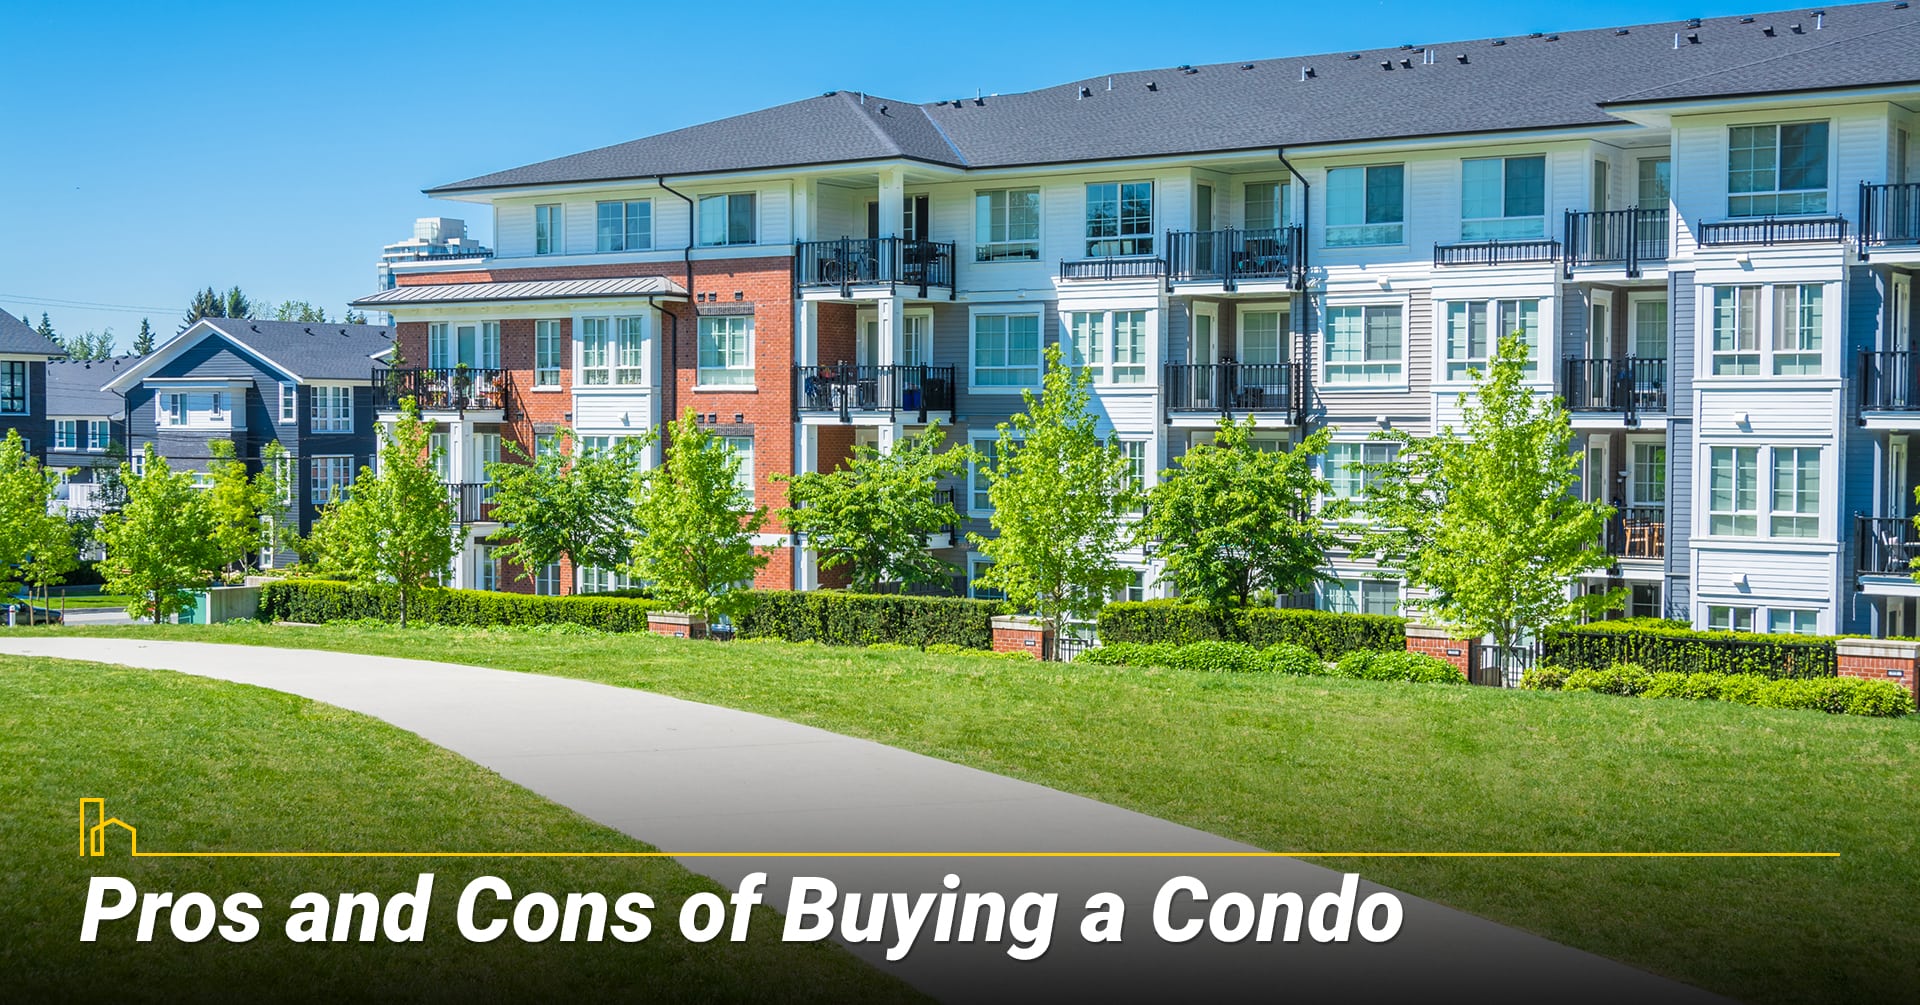 PROS AND CONS OF BUYING A CONDO